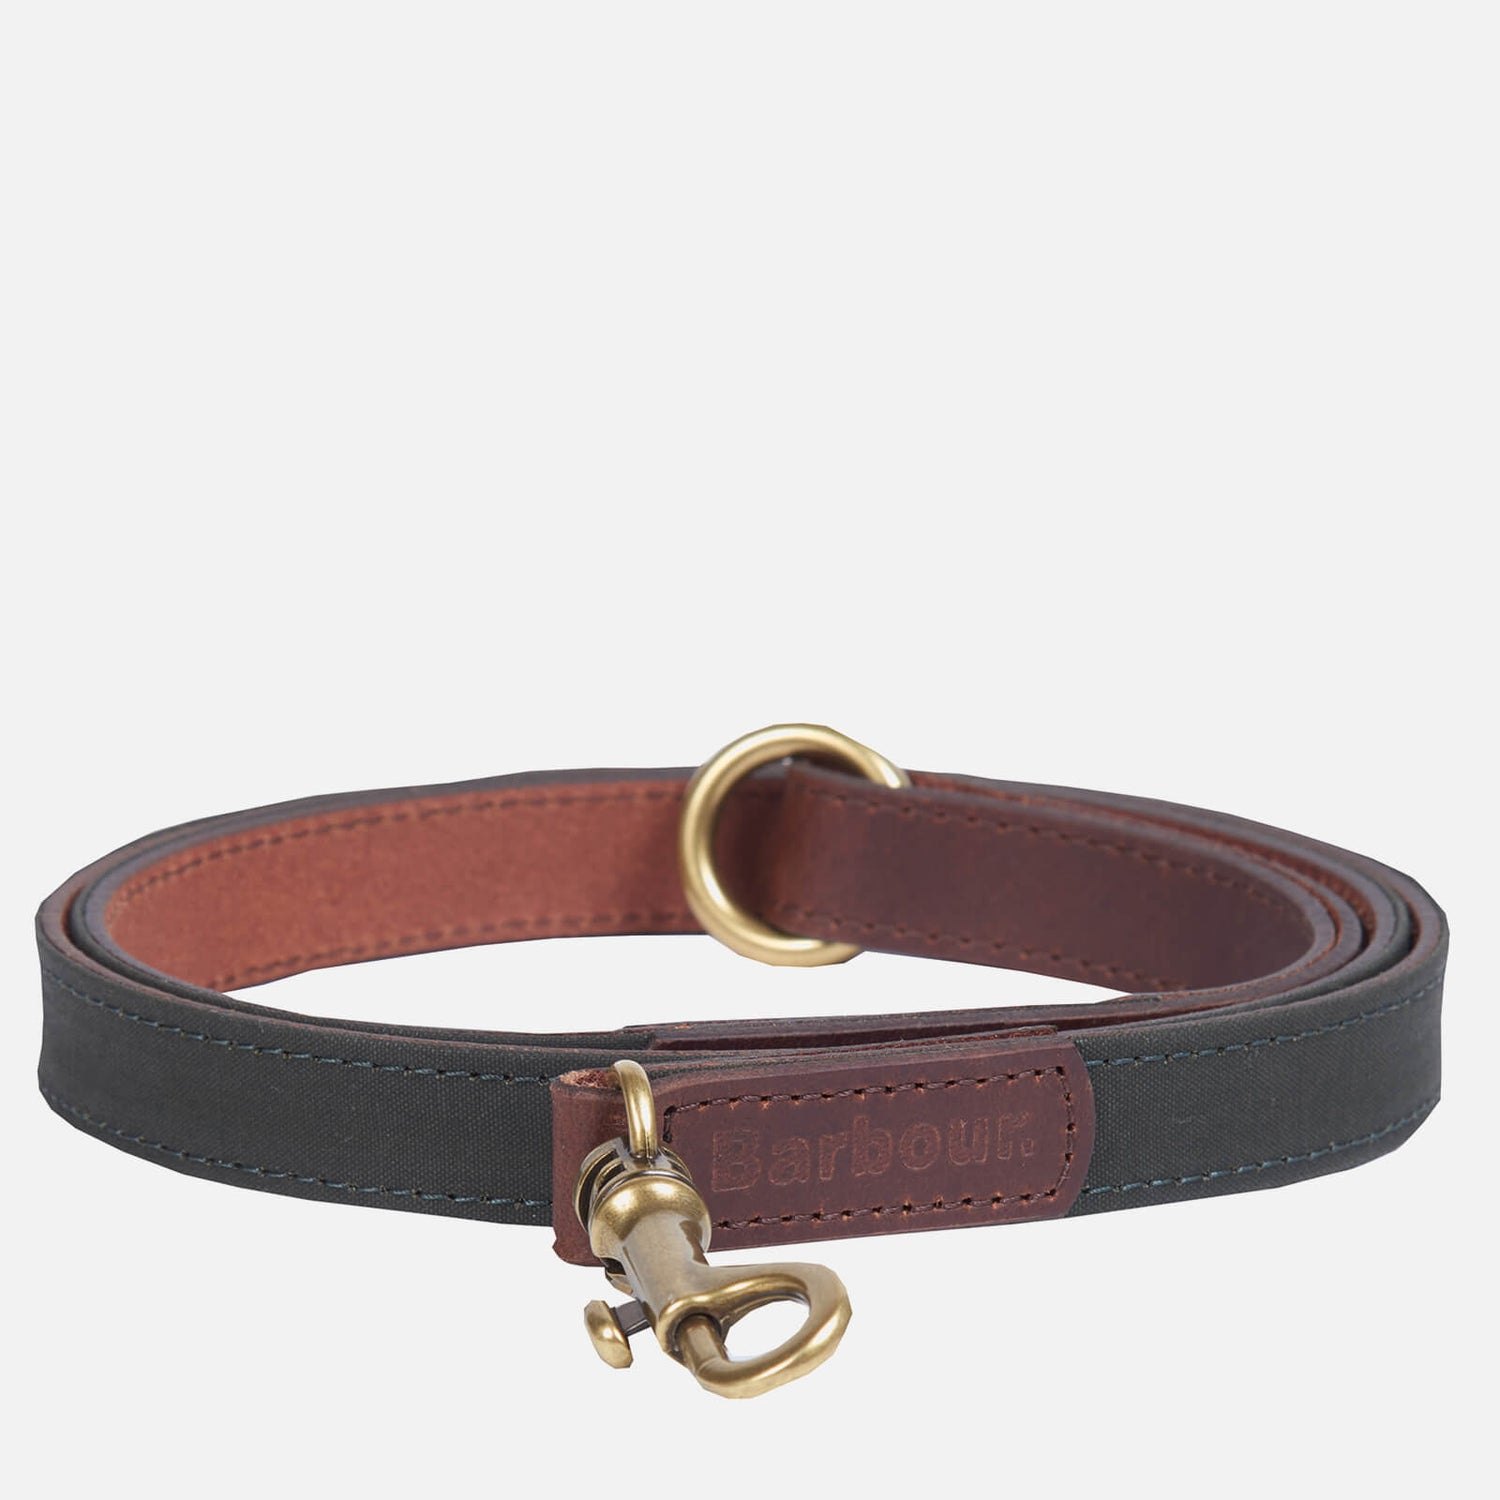 Barbour Dogs Wax/Leather Lead - Olive